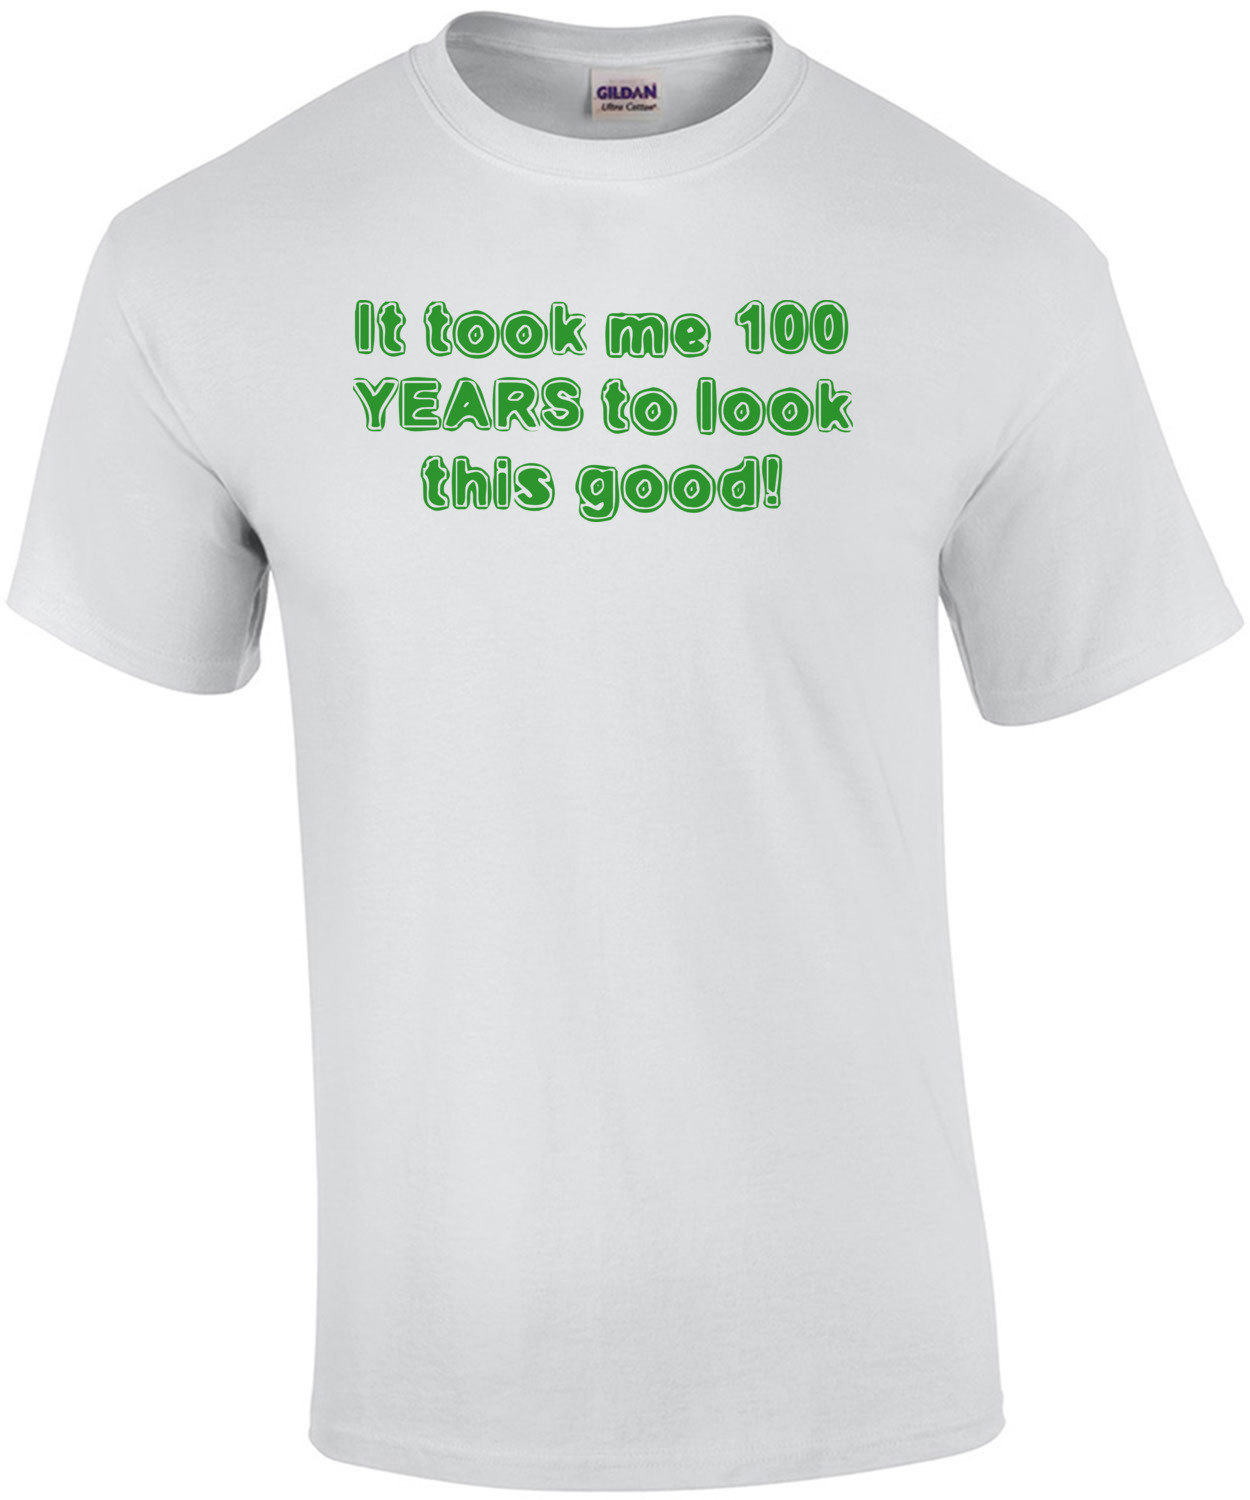 It took me 100 YEARS to look this good! - Happy Birthday Shirt